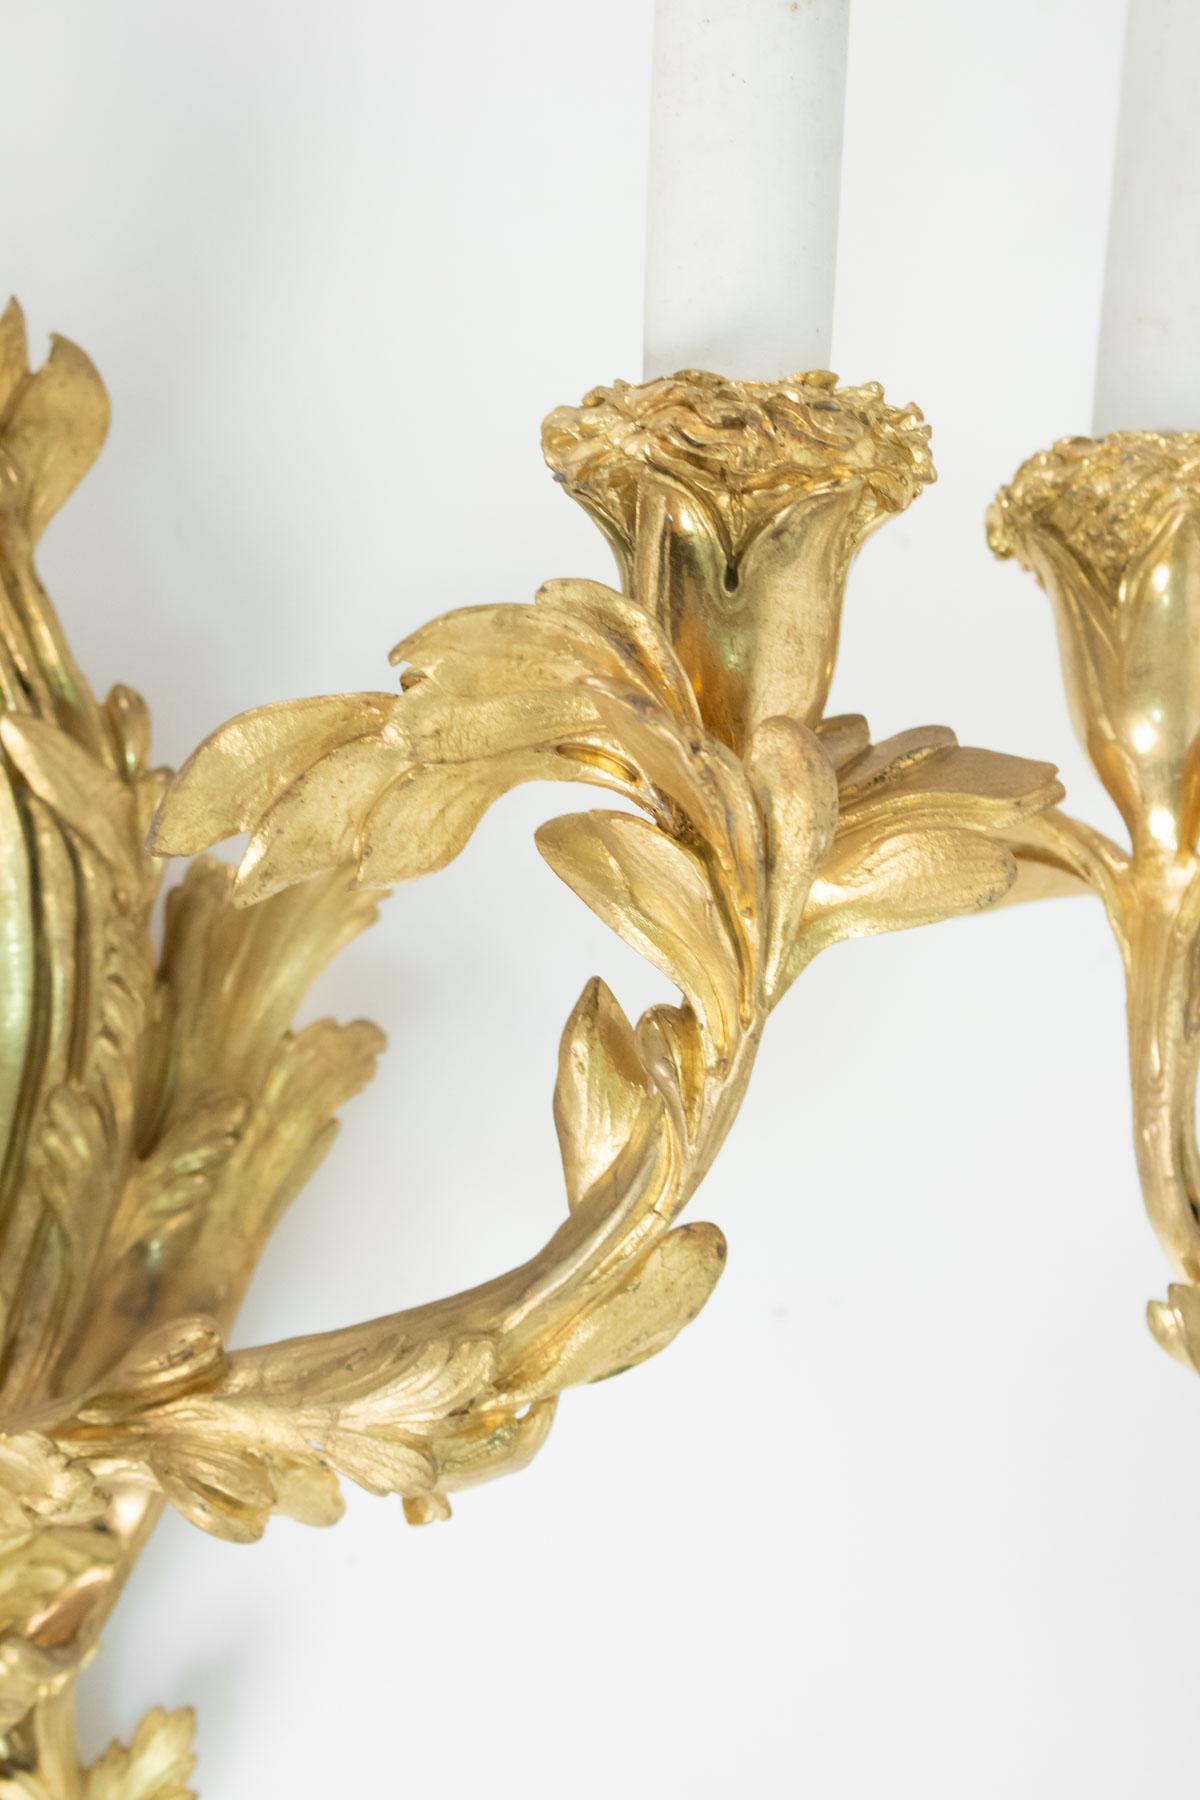 Pair of Gilt Bronze Sconces from the 19th Century in Louis XV Style 2